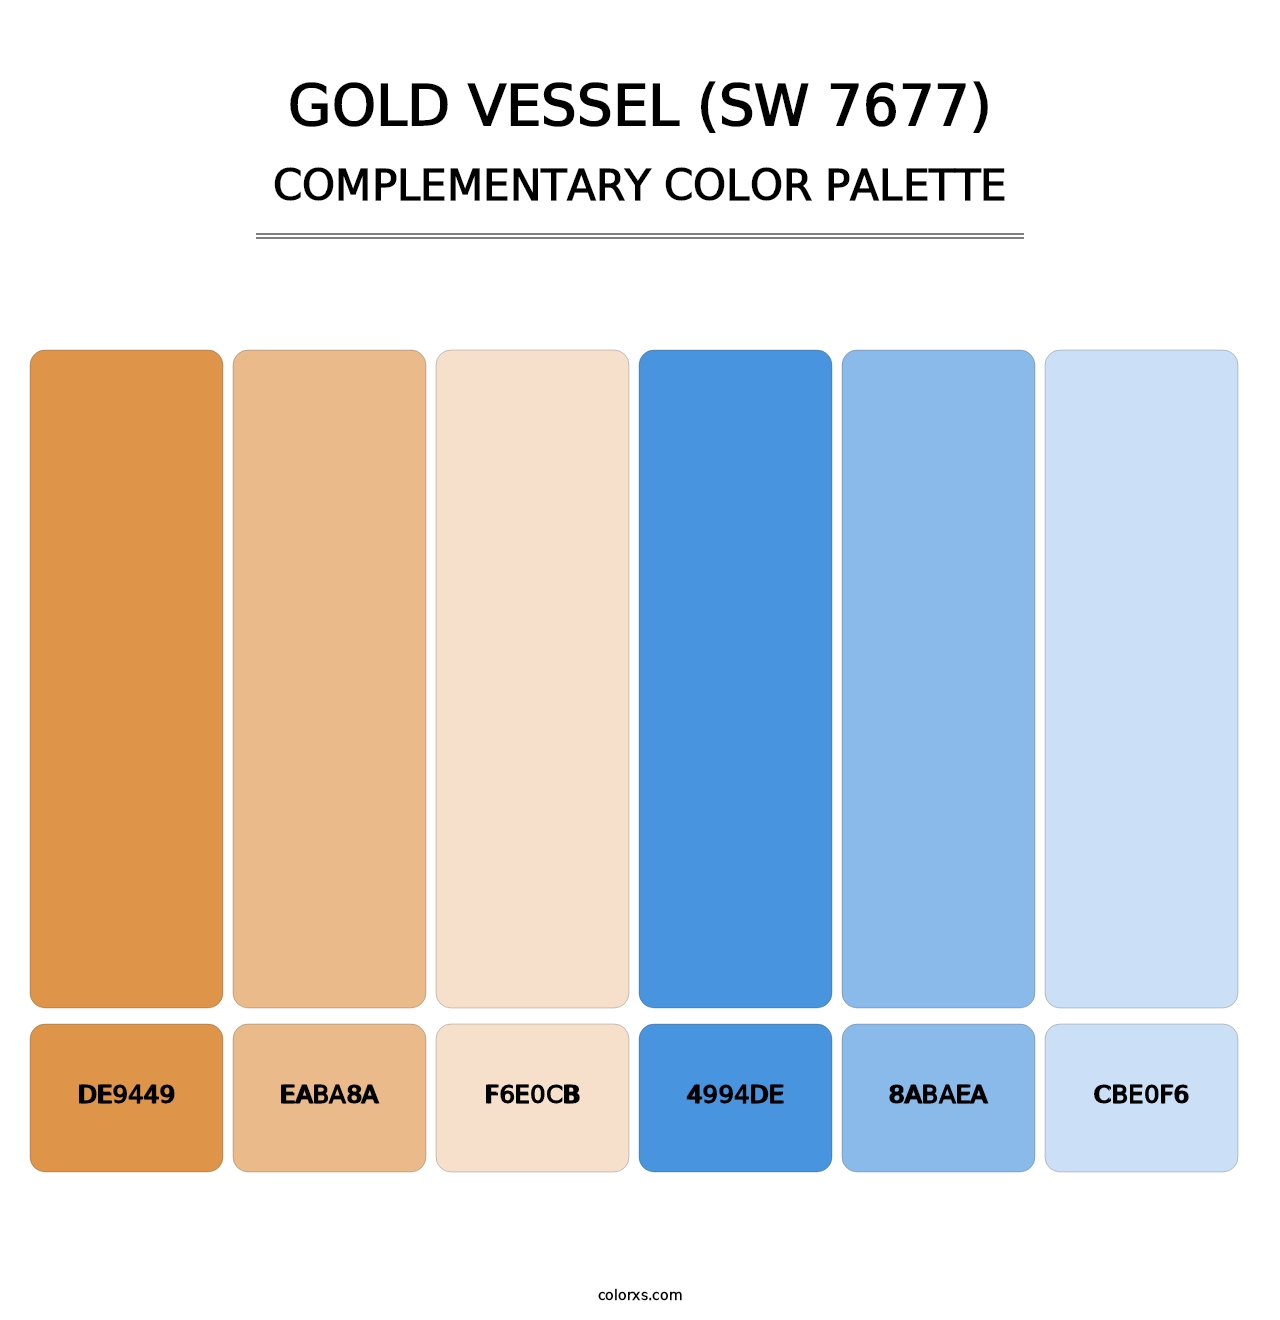 Gold Vessel (SW 7677) - Complementary Color Palette